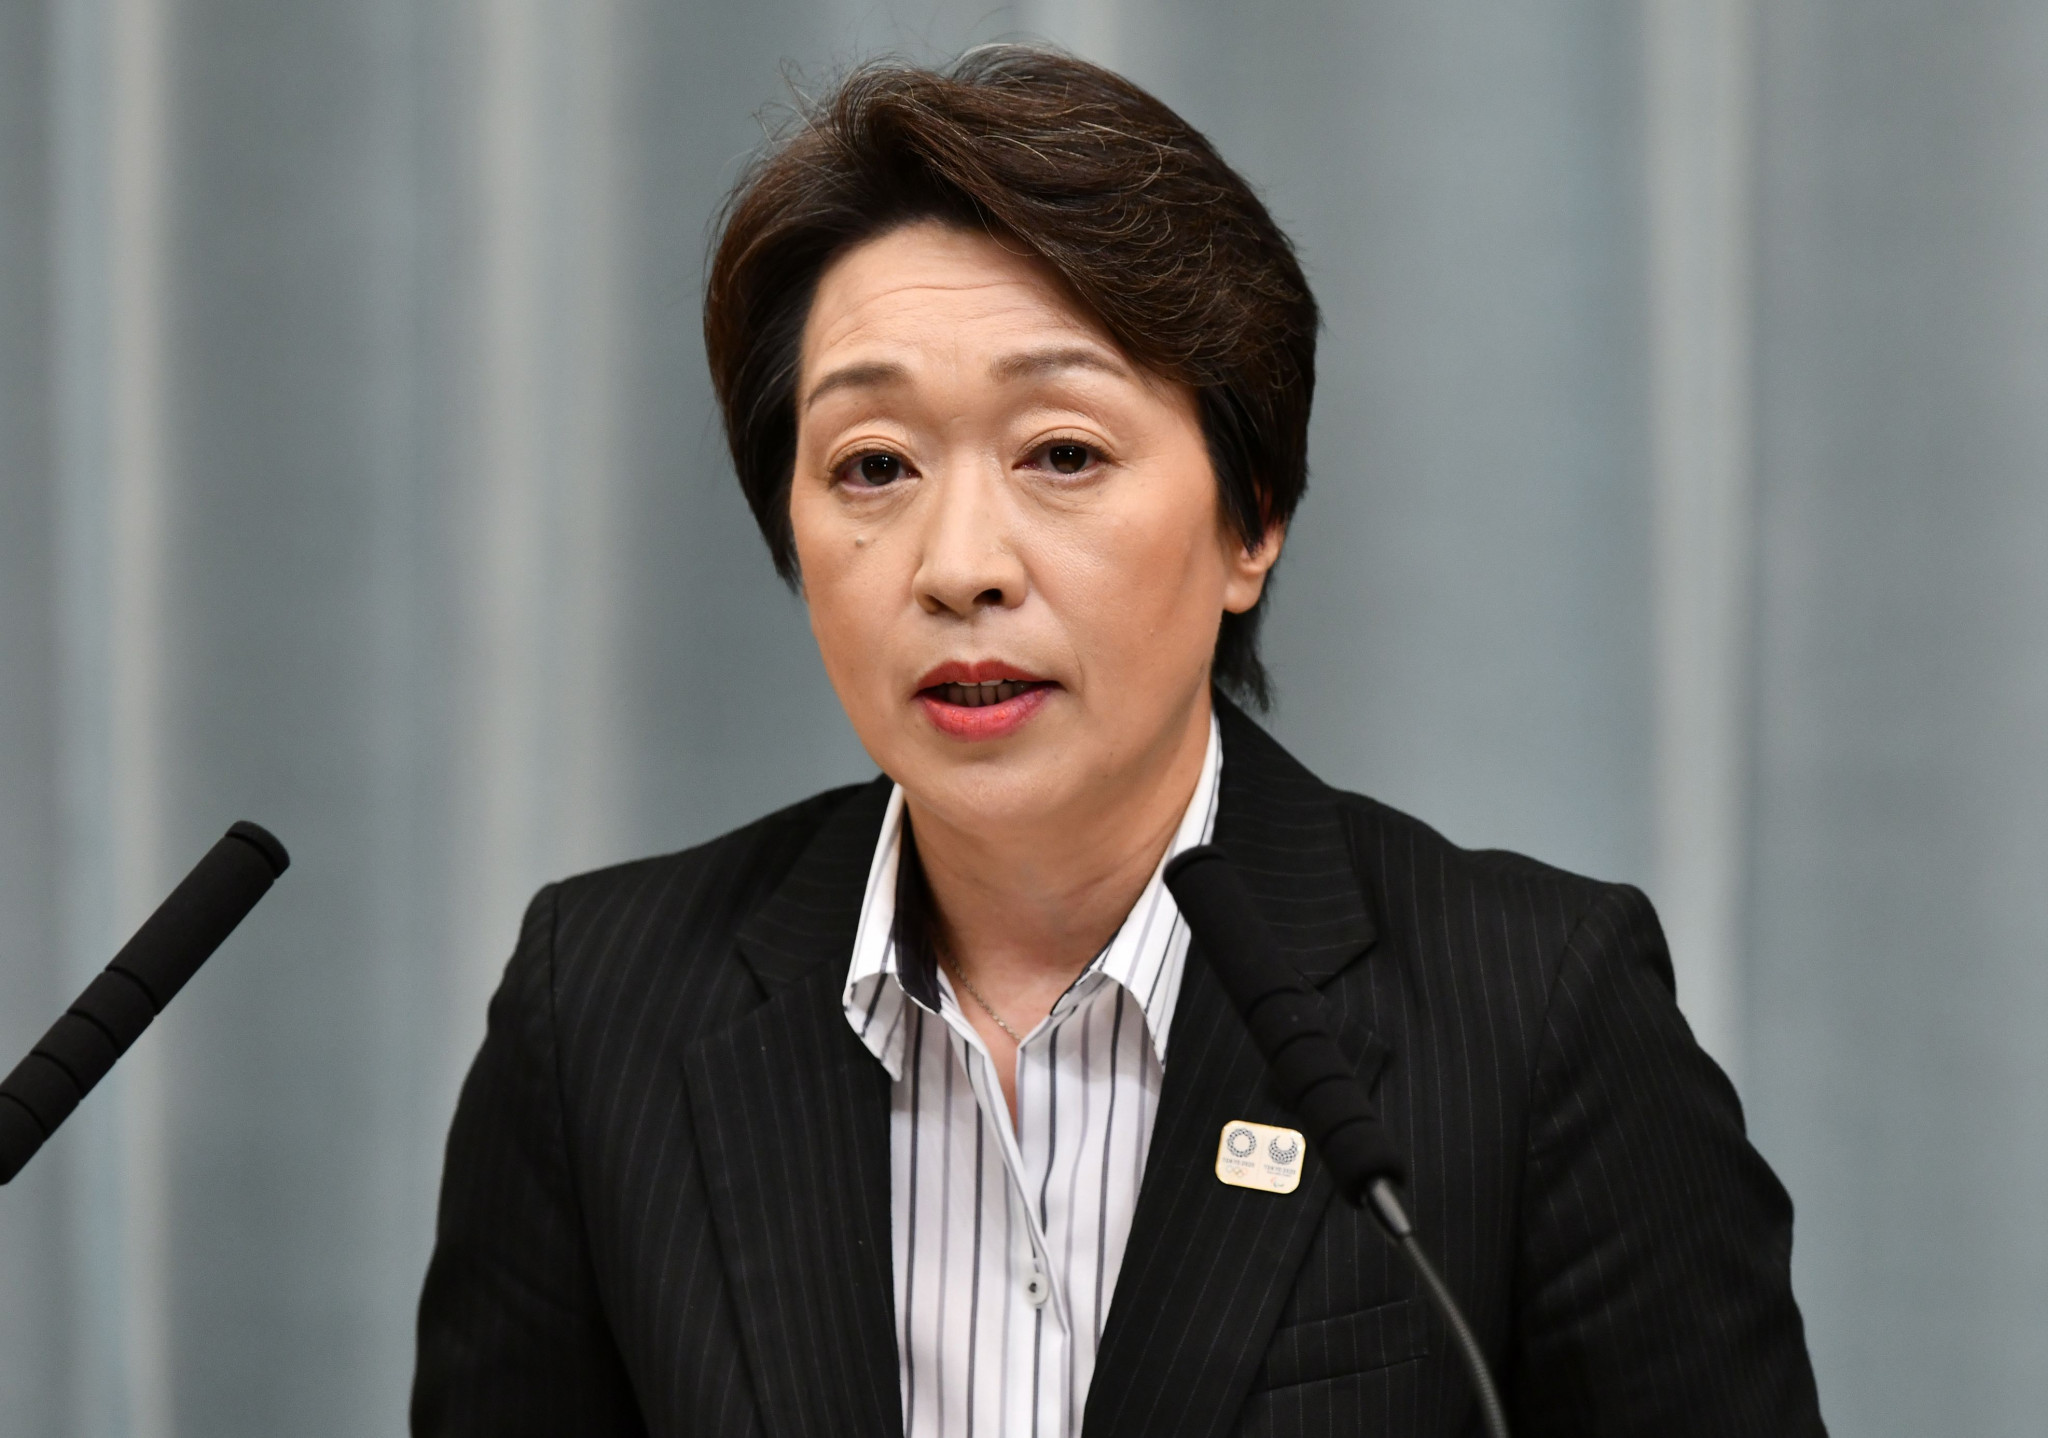 Japan's Olympics Minister Seiko Hashimoto last week backtracked after initially suggesting the Games could be delayed until the end of 2020 ©Getty Images